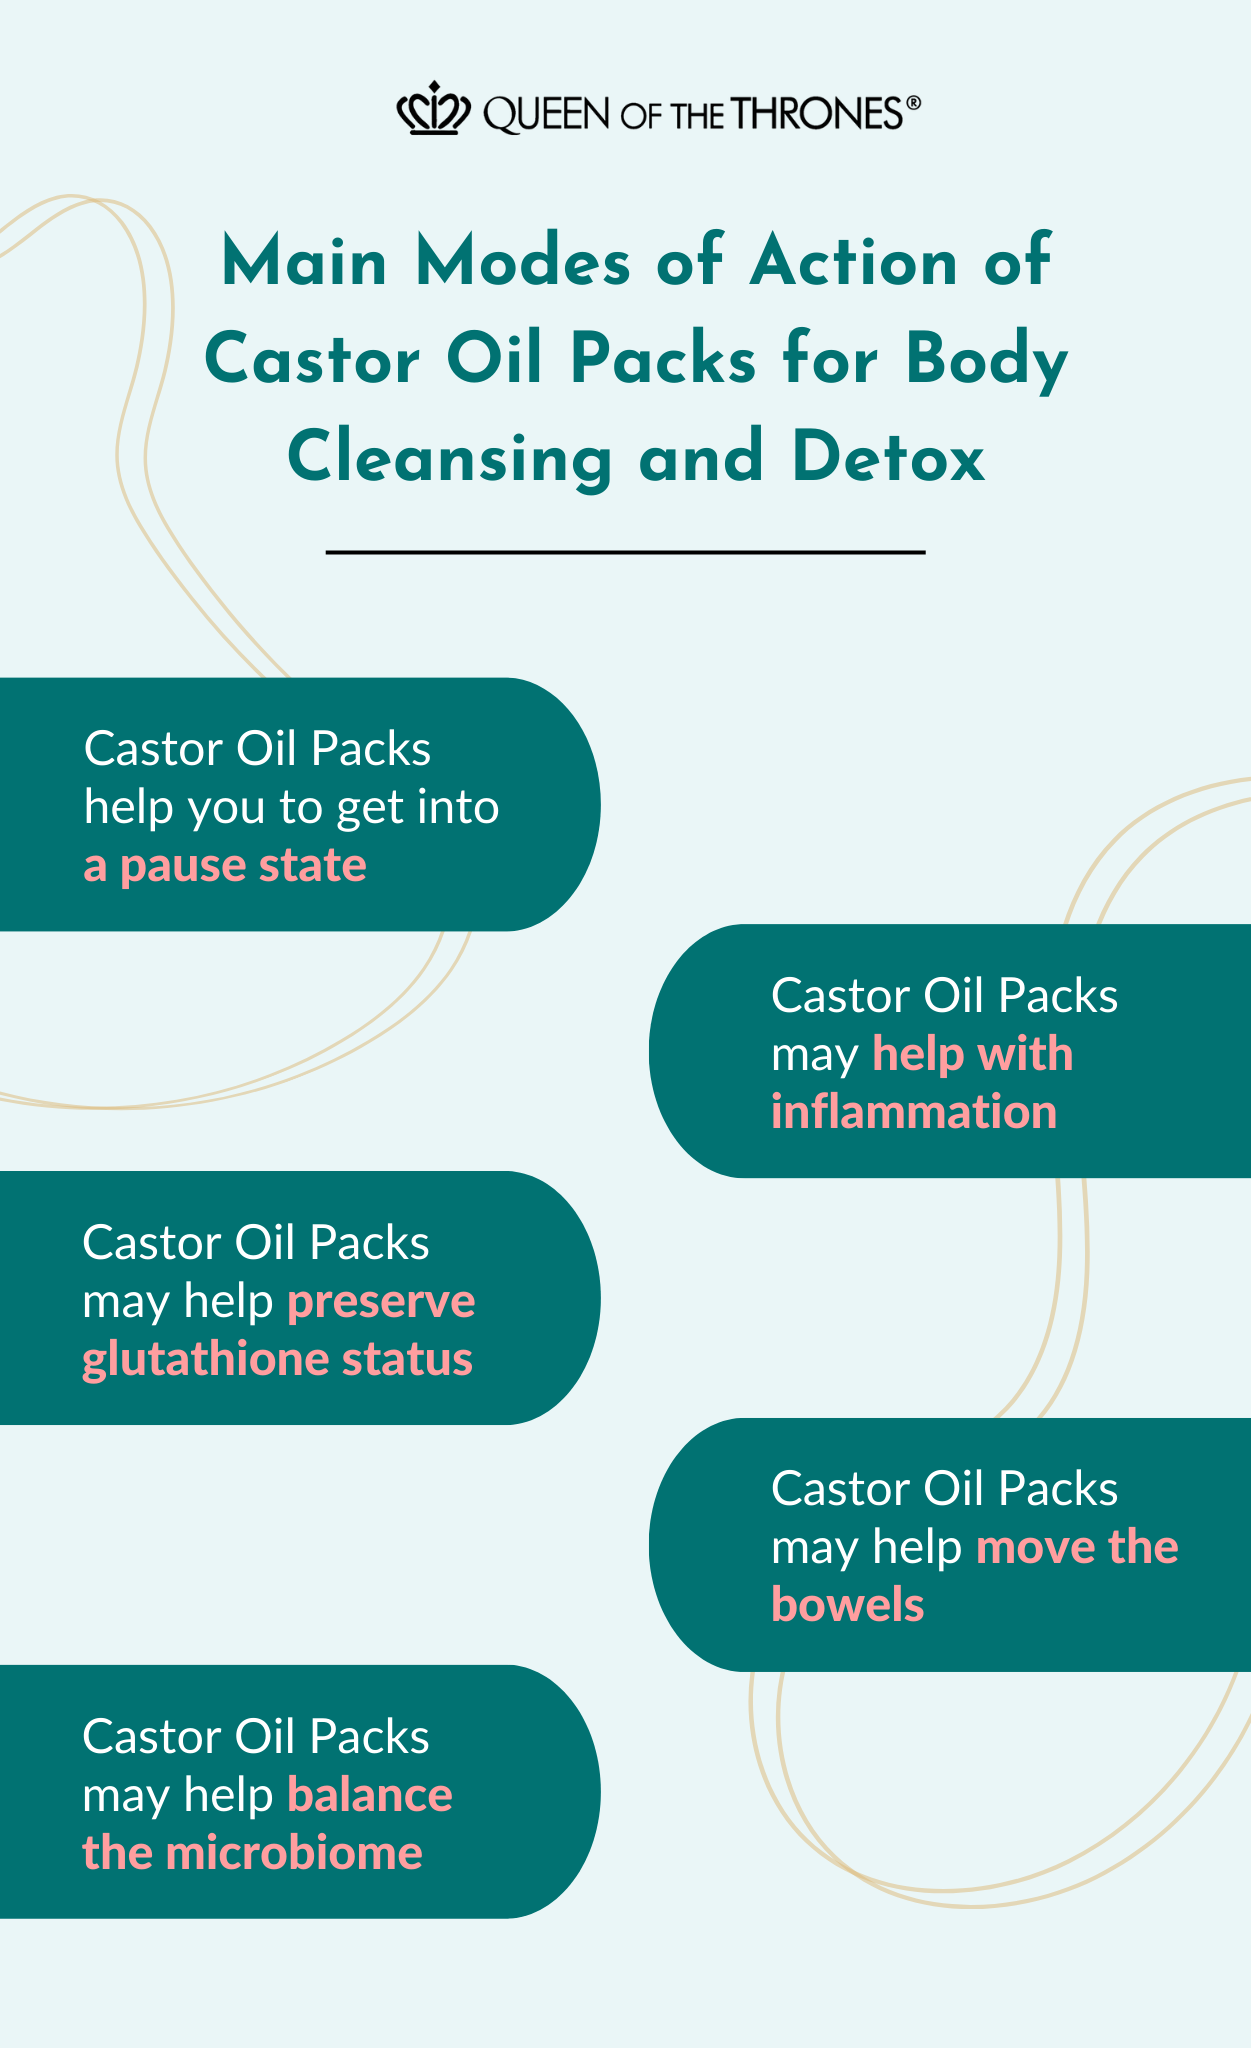 Discover the benefits of Castor Oil Packs for detox with Queen of the Thrones